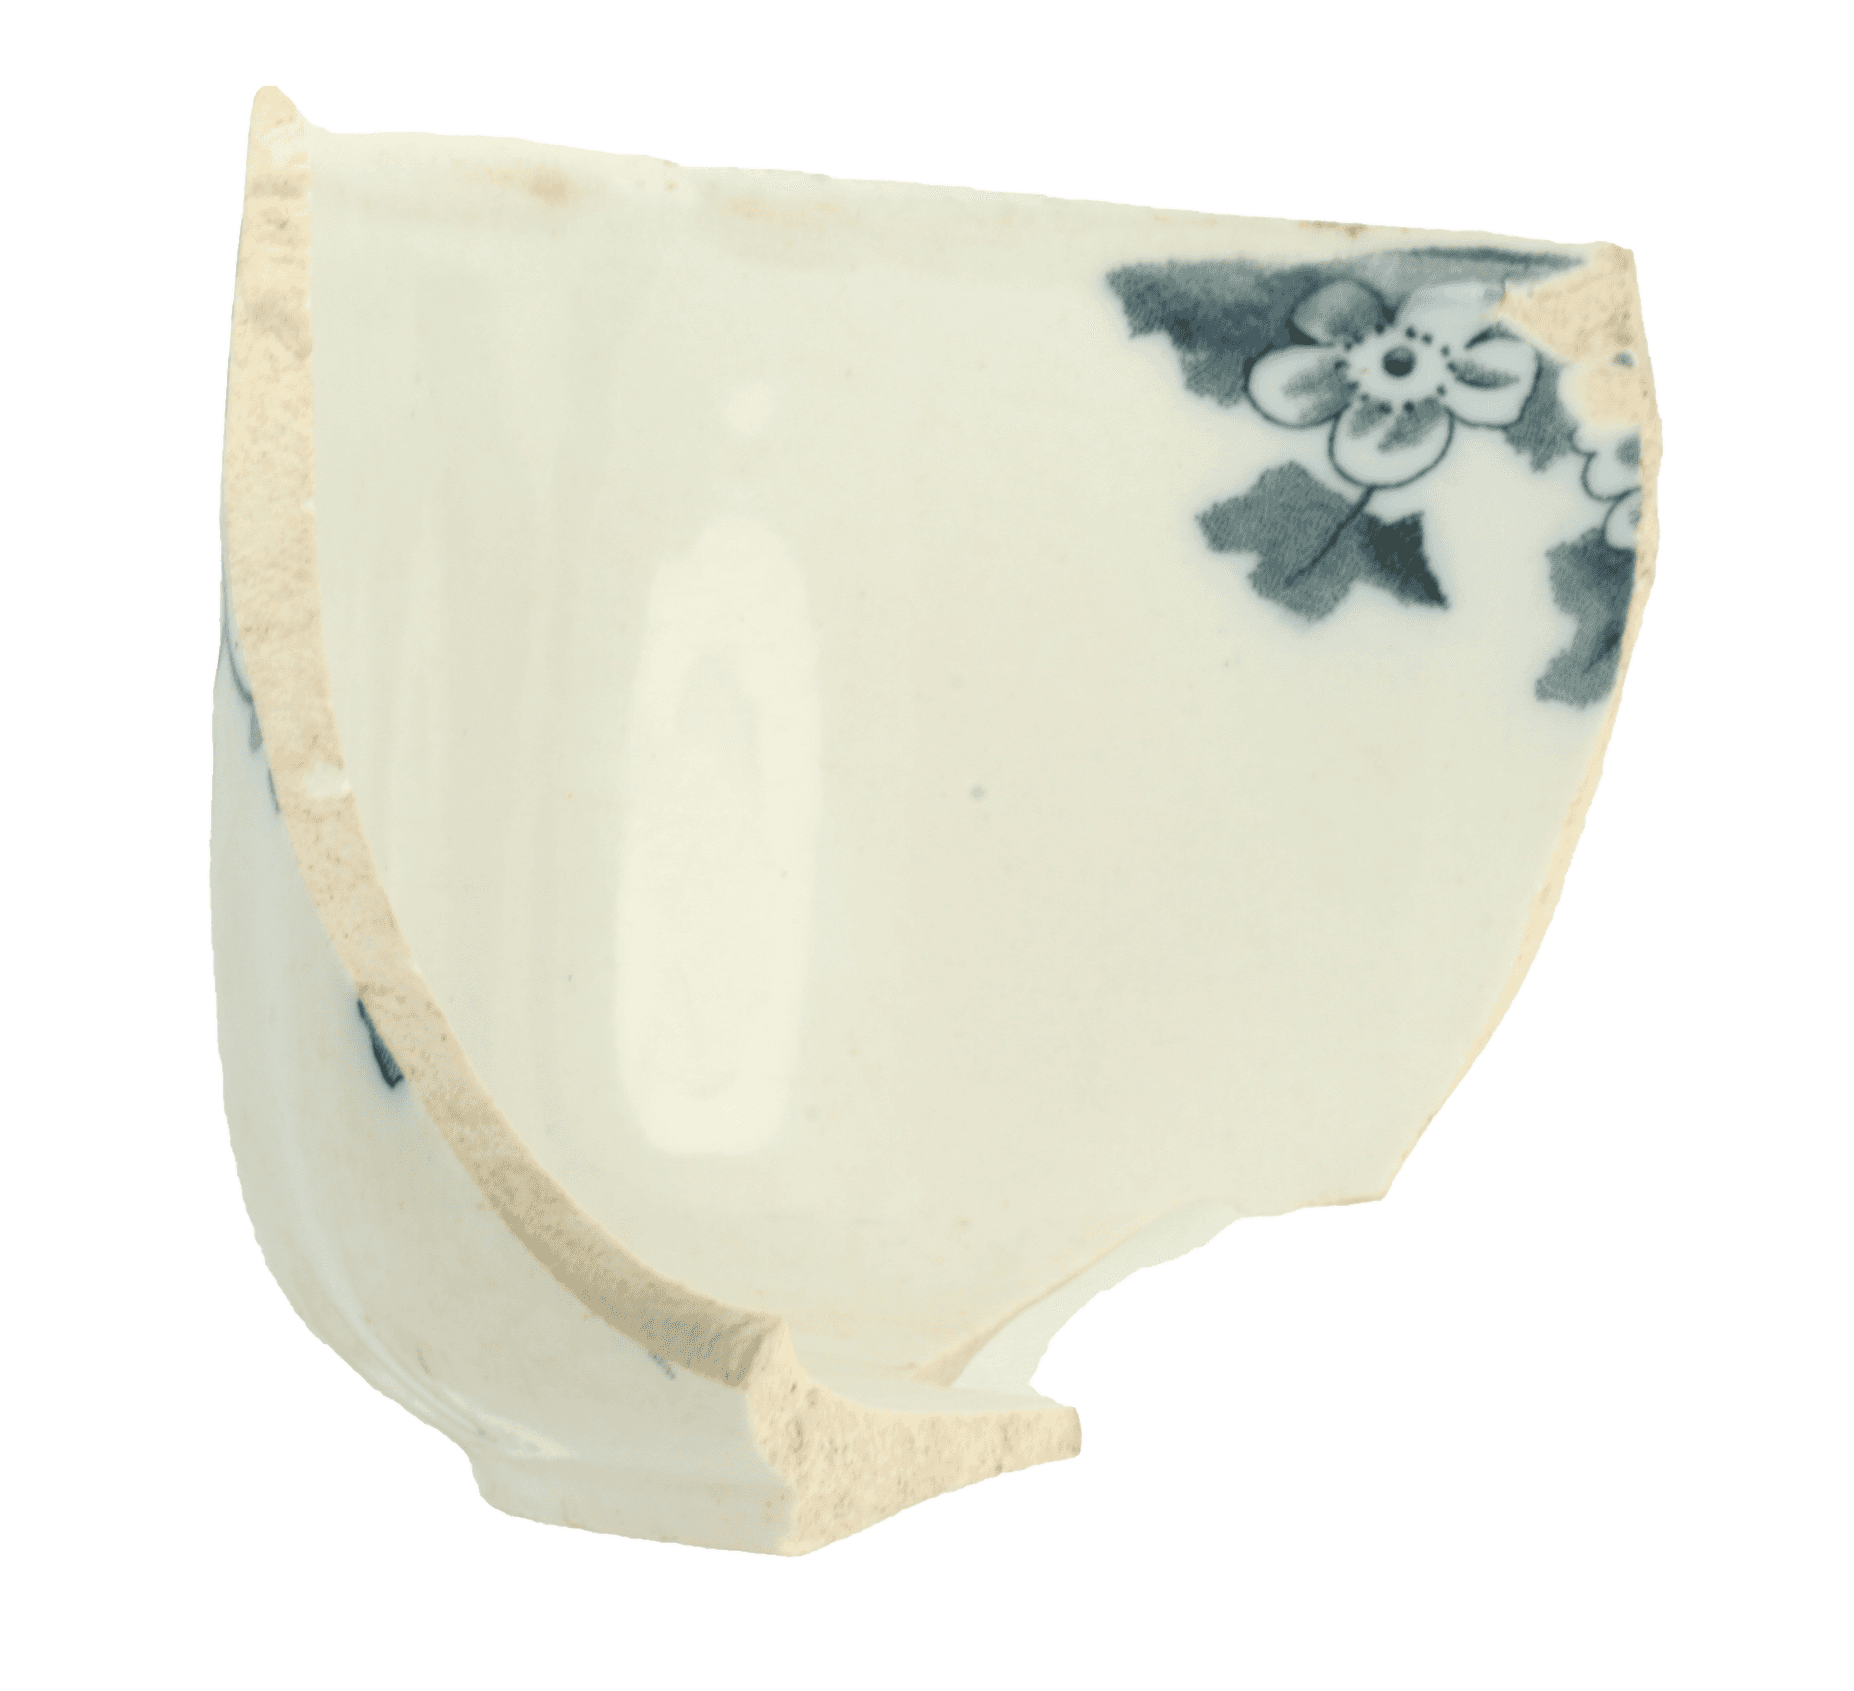 Fragment of a white porcelain tea cup with blue floral design.